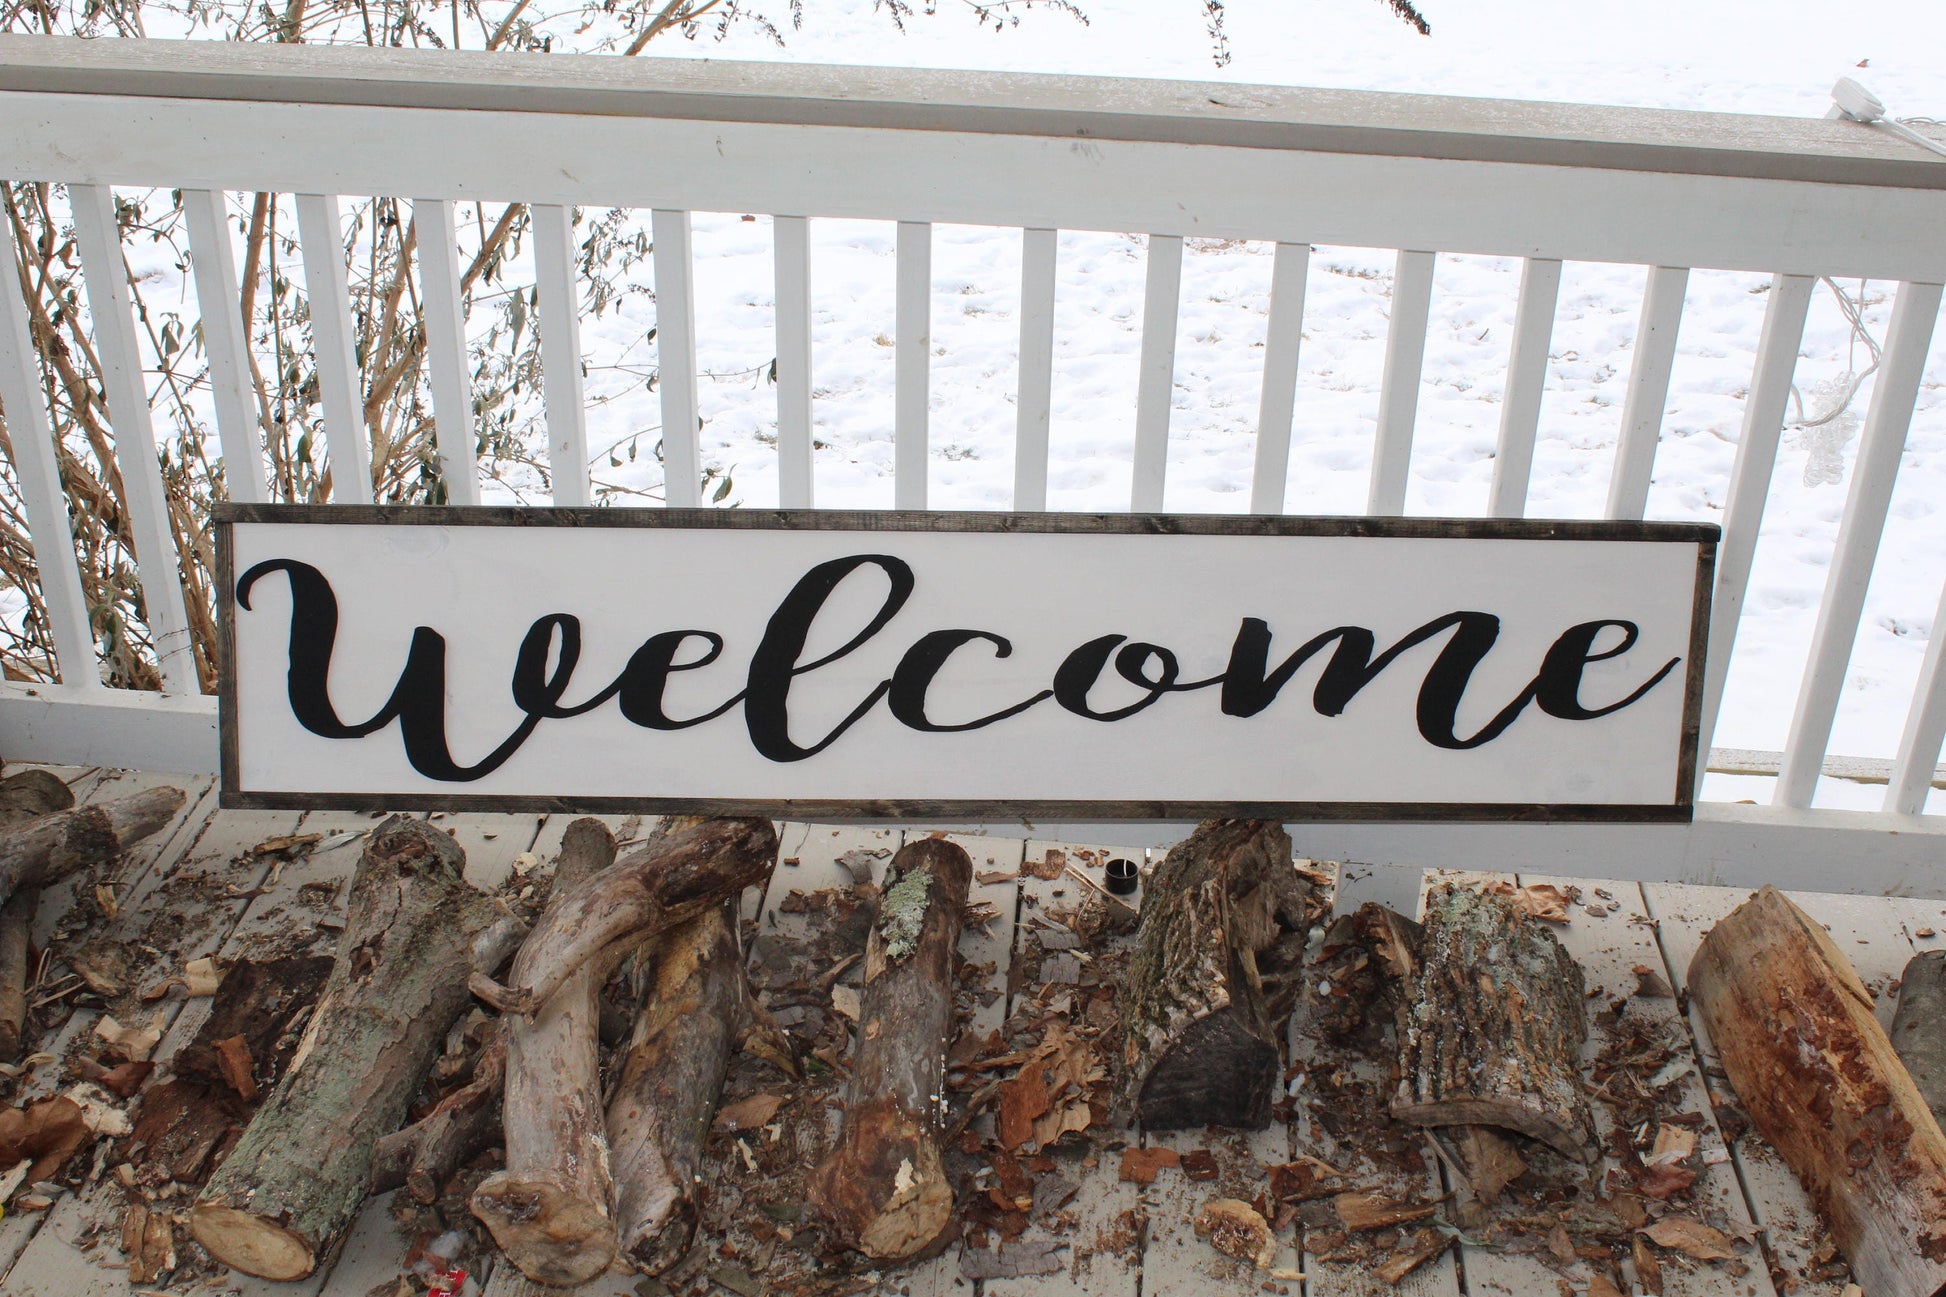 Large rustic welcome sign, front porch deck decor outdoor signs indoor signage great decor shabby chic primitive farmhouse wood farm house